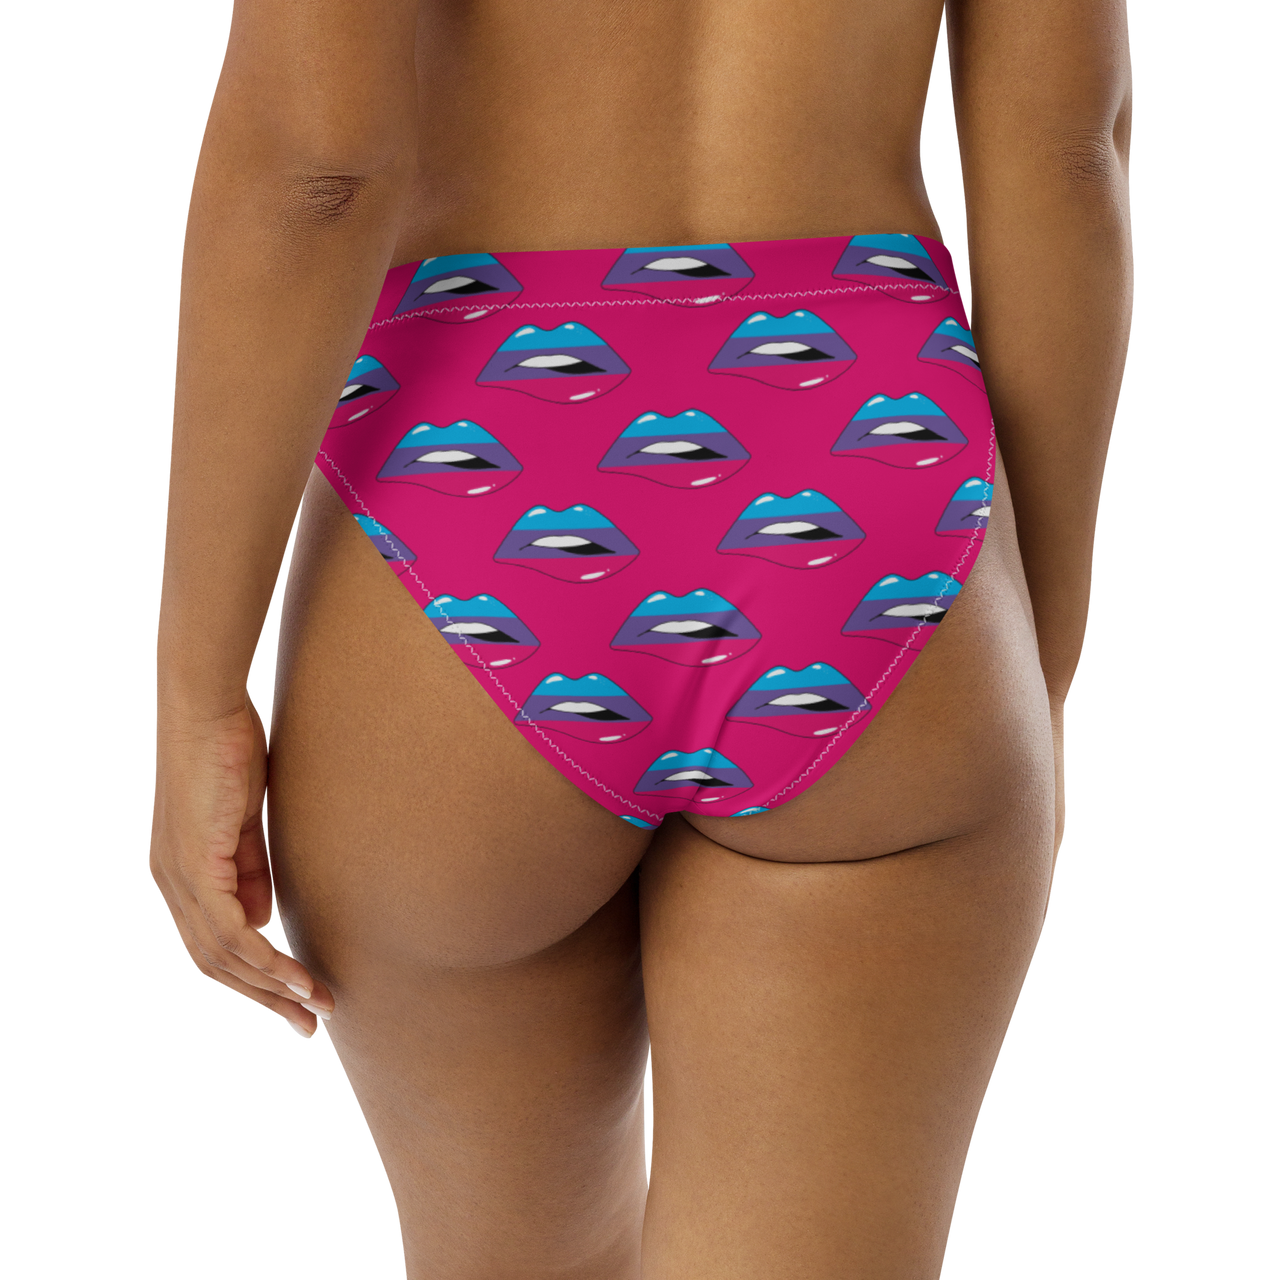 Androgyne Flag LGBTQ Kisses Underwear for They/Them Him/Her - Pink SHAVA